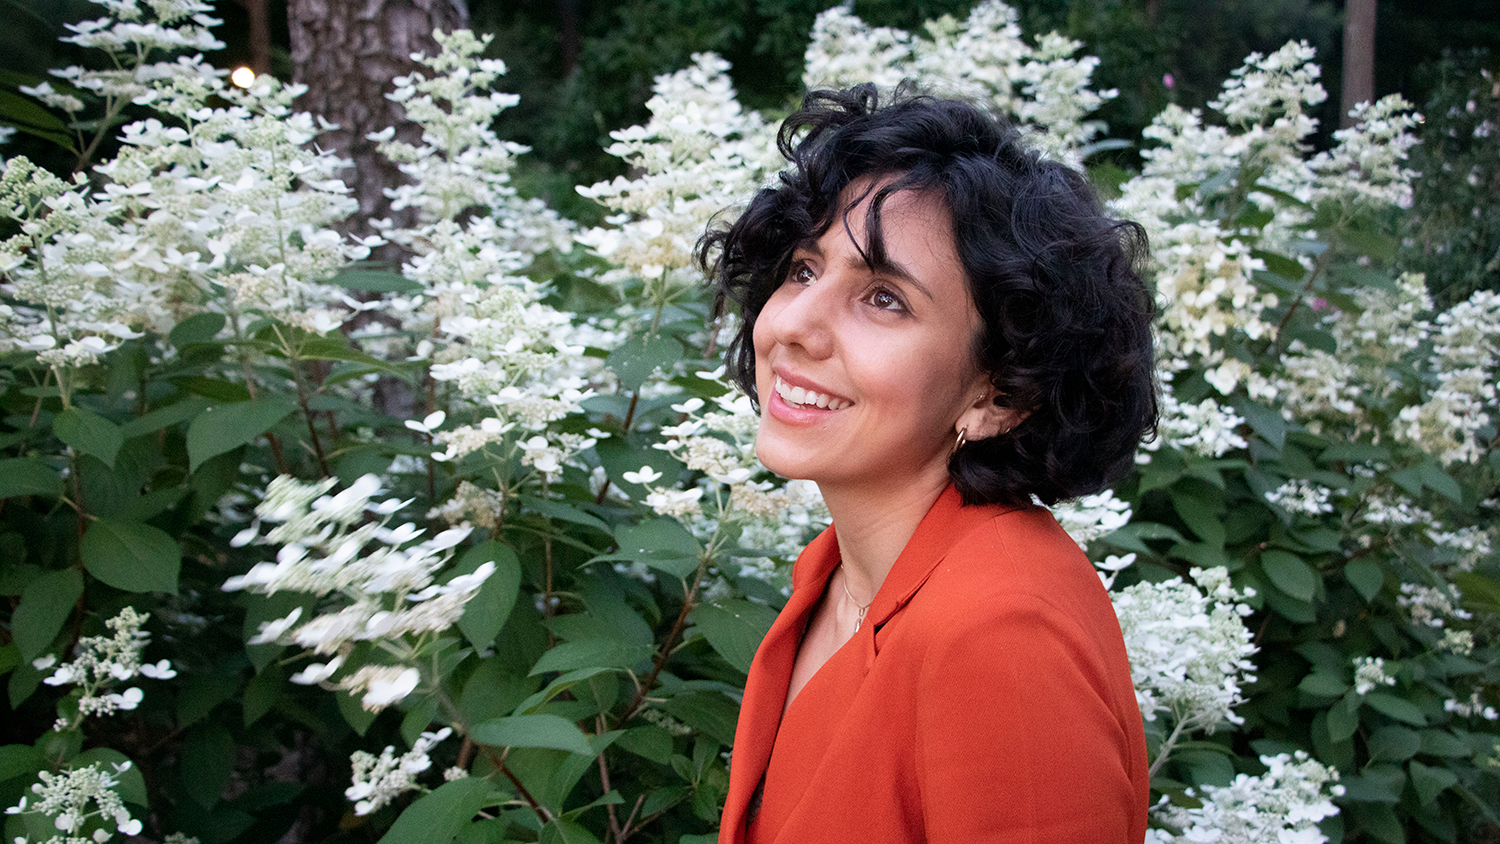 Olivia Vila - Olivia Vilá is Creating Equitable, Resilient Communities - College of Natural Resources News NC State University